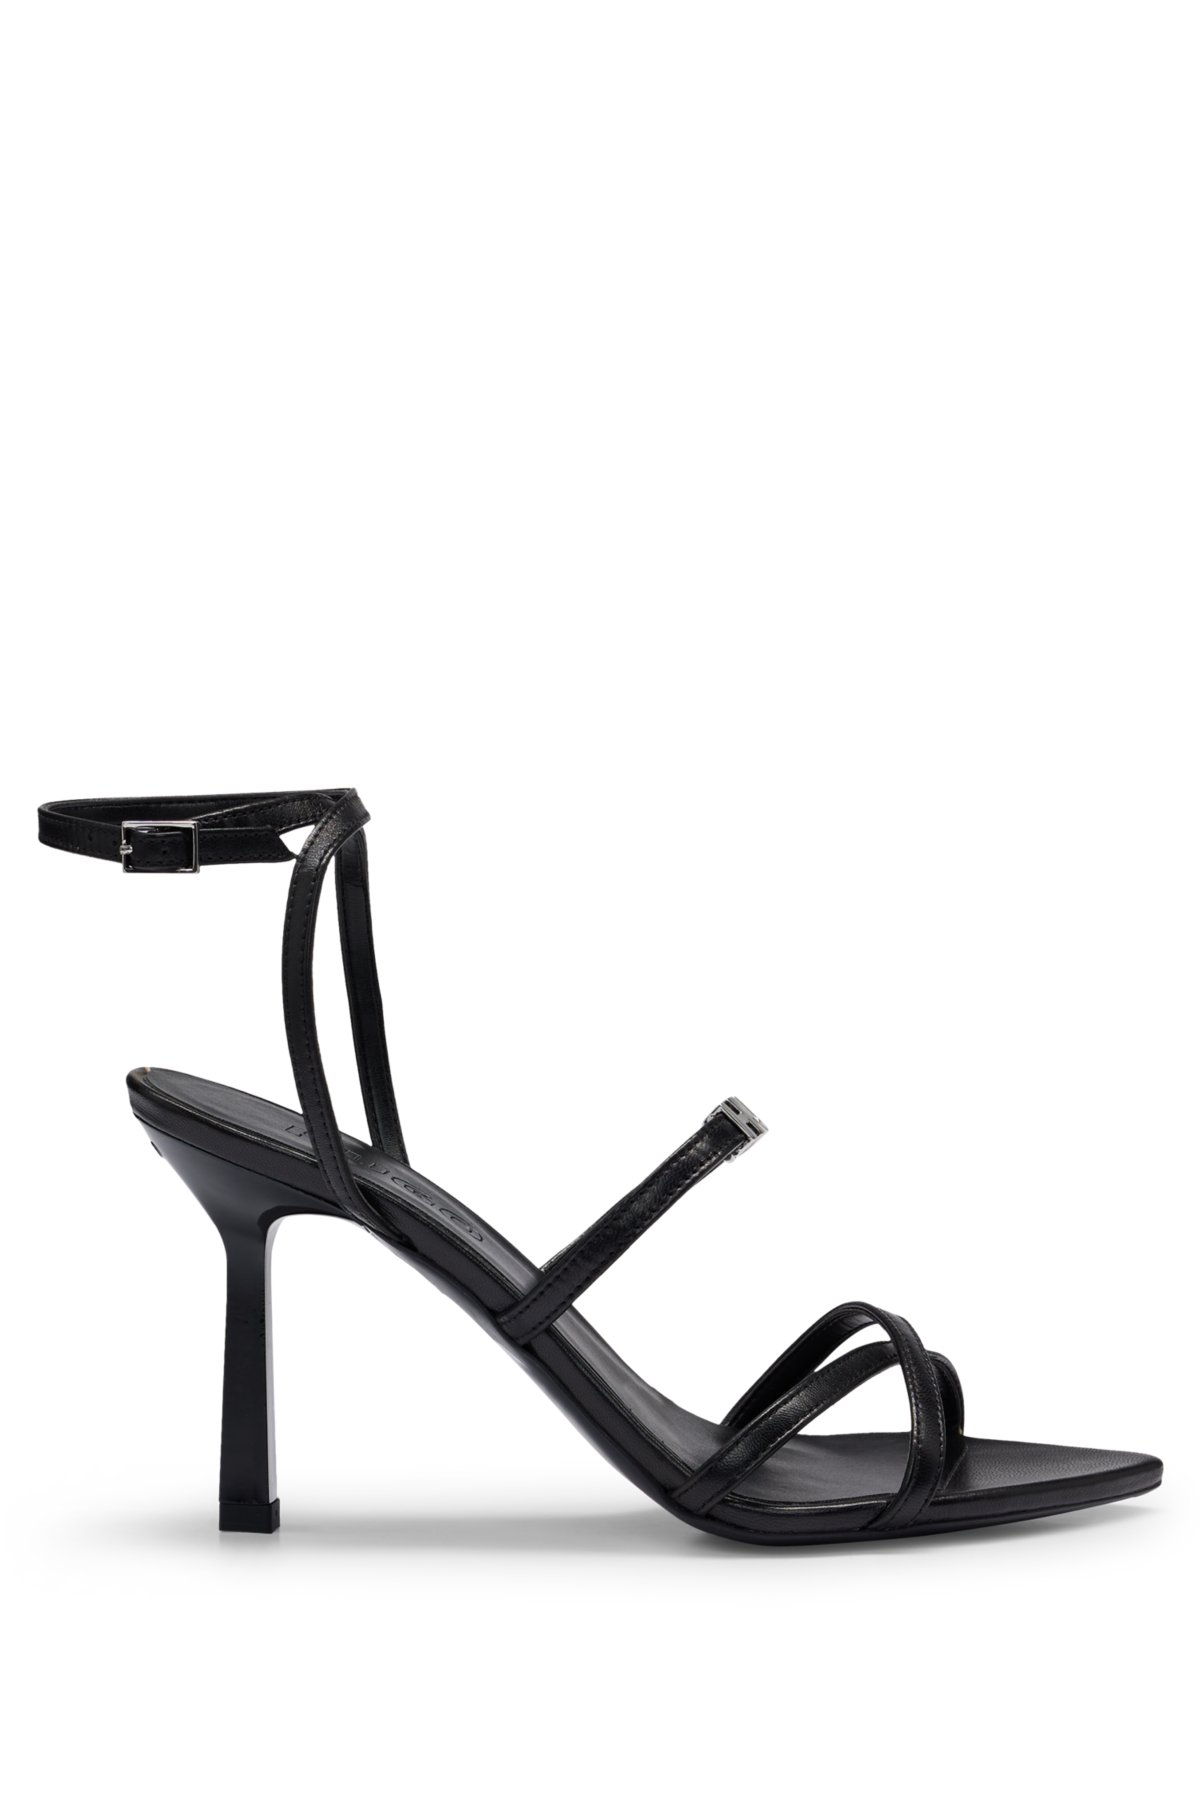 Nappa-leather strappy sandals with logo trim, Black